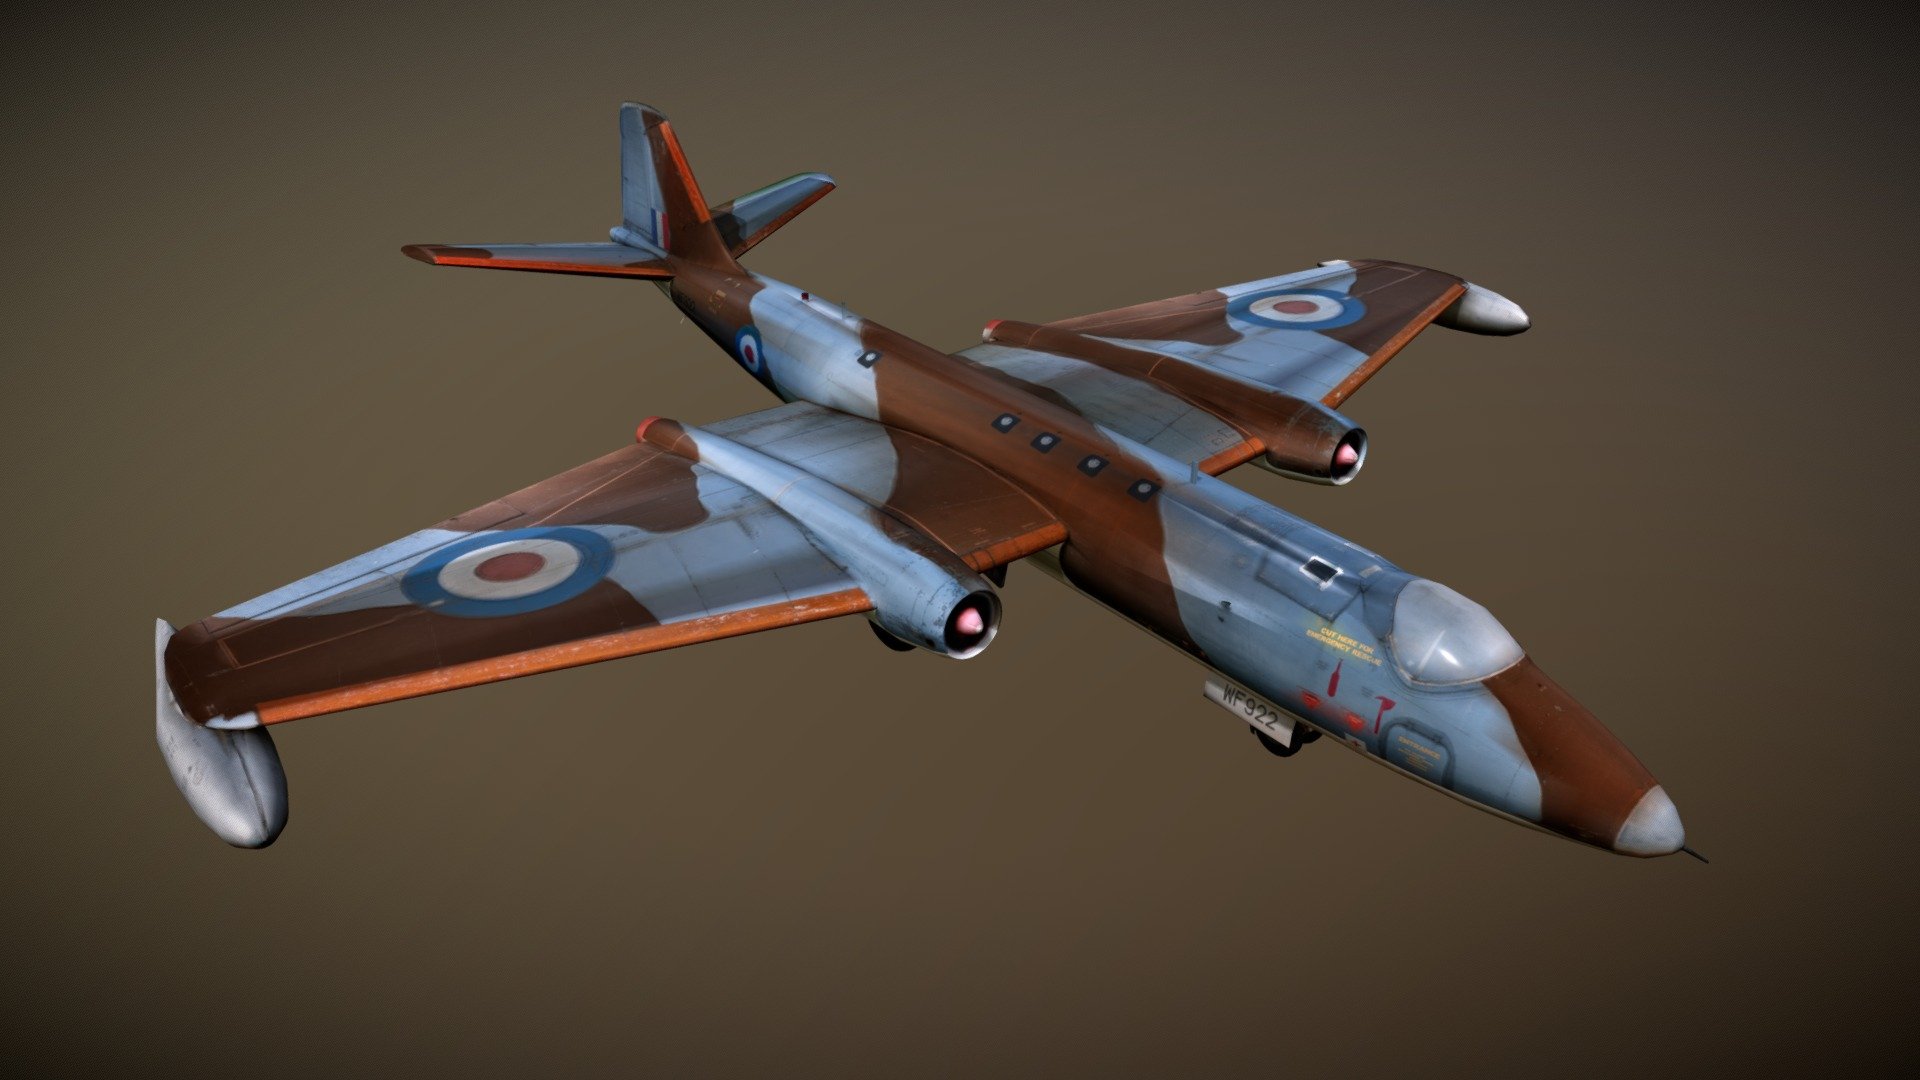 The English Electric Canberra is an icon of British Cold War aviation. The model is rigged with movable landing gear, bomb bay doors, aelerons, elivators and rudder 3d model